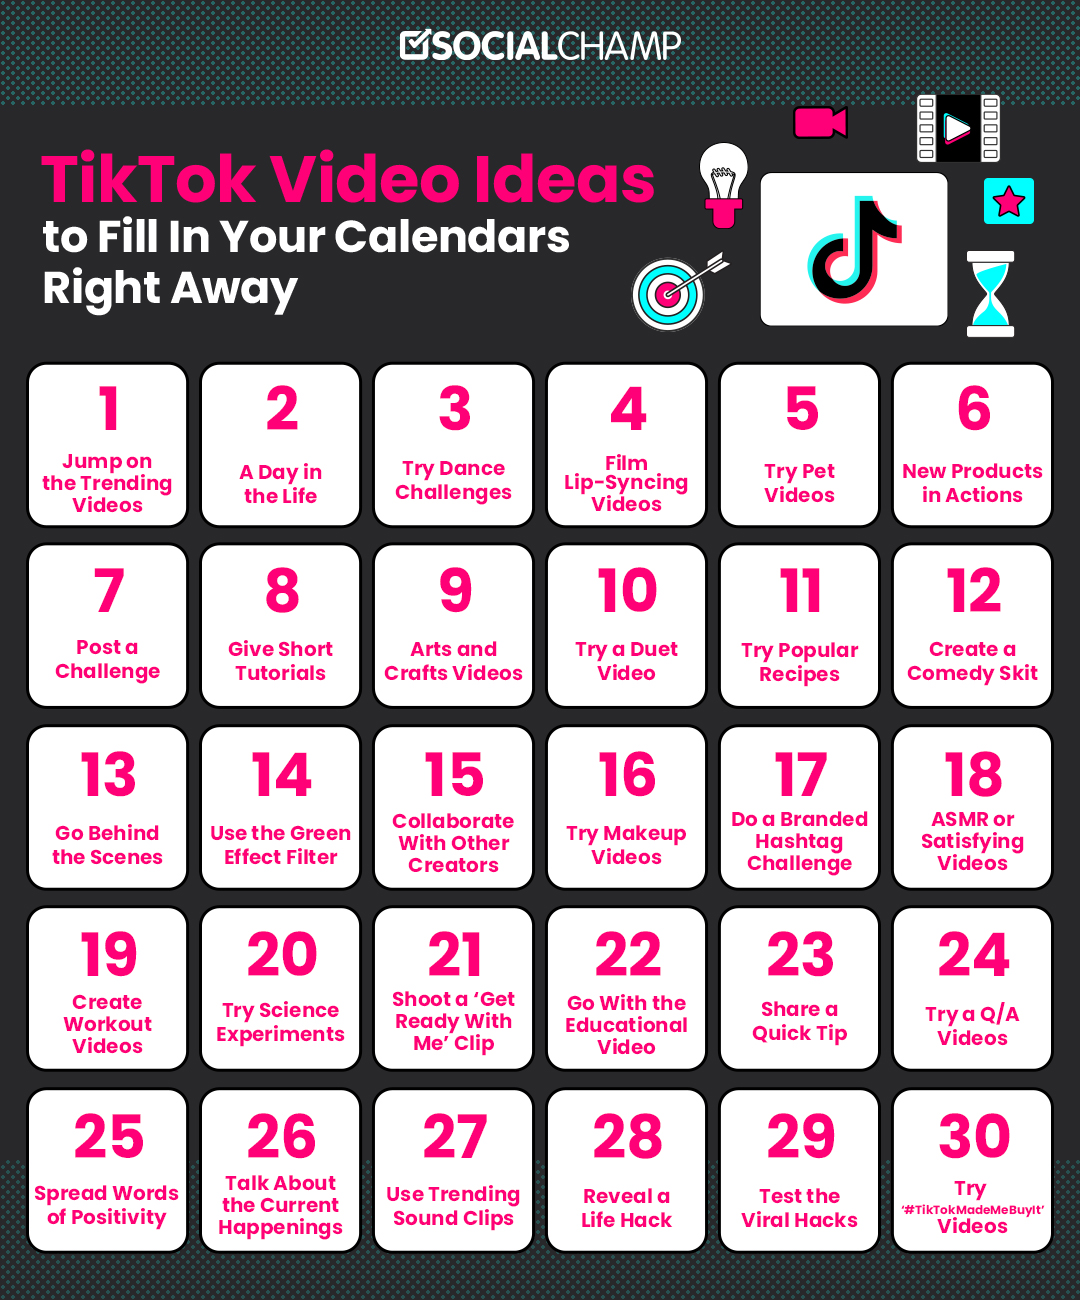 How to Go Viral on TikTok - 5 Tips that got me 2.4 million views in a day 